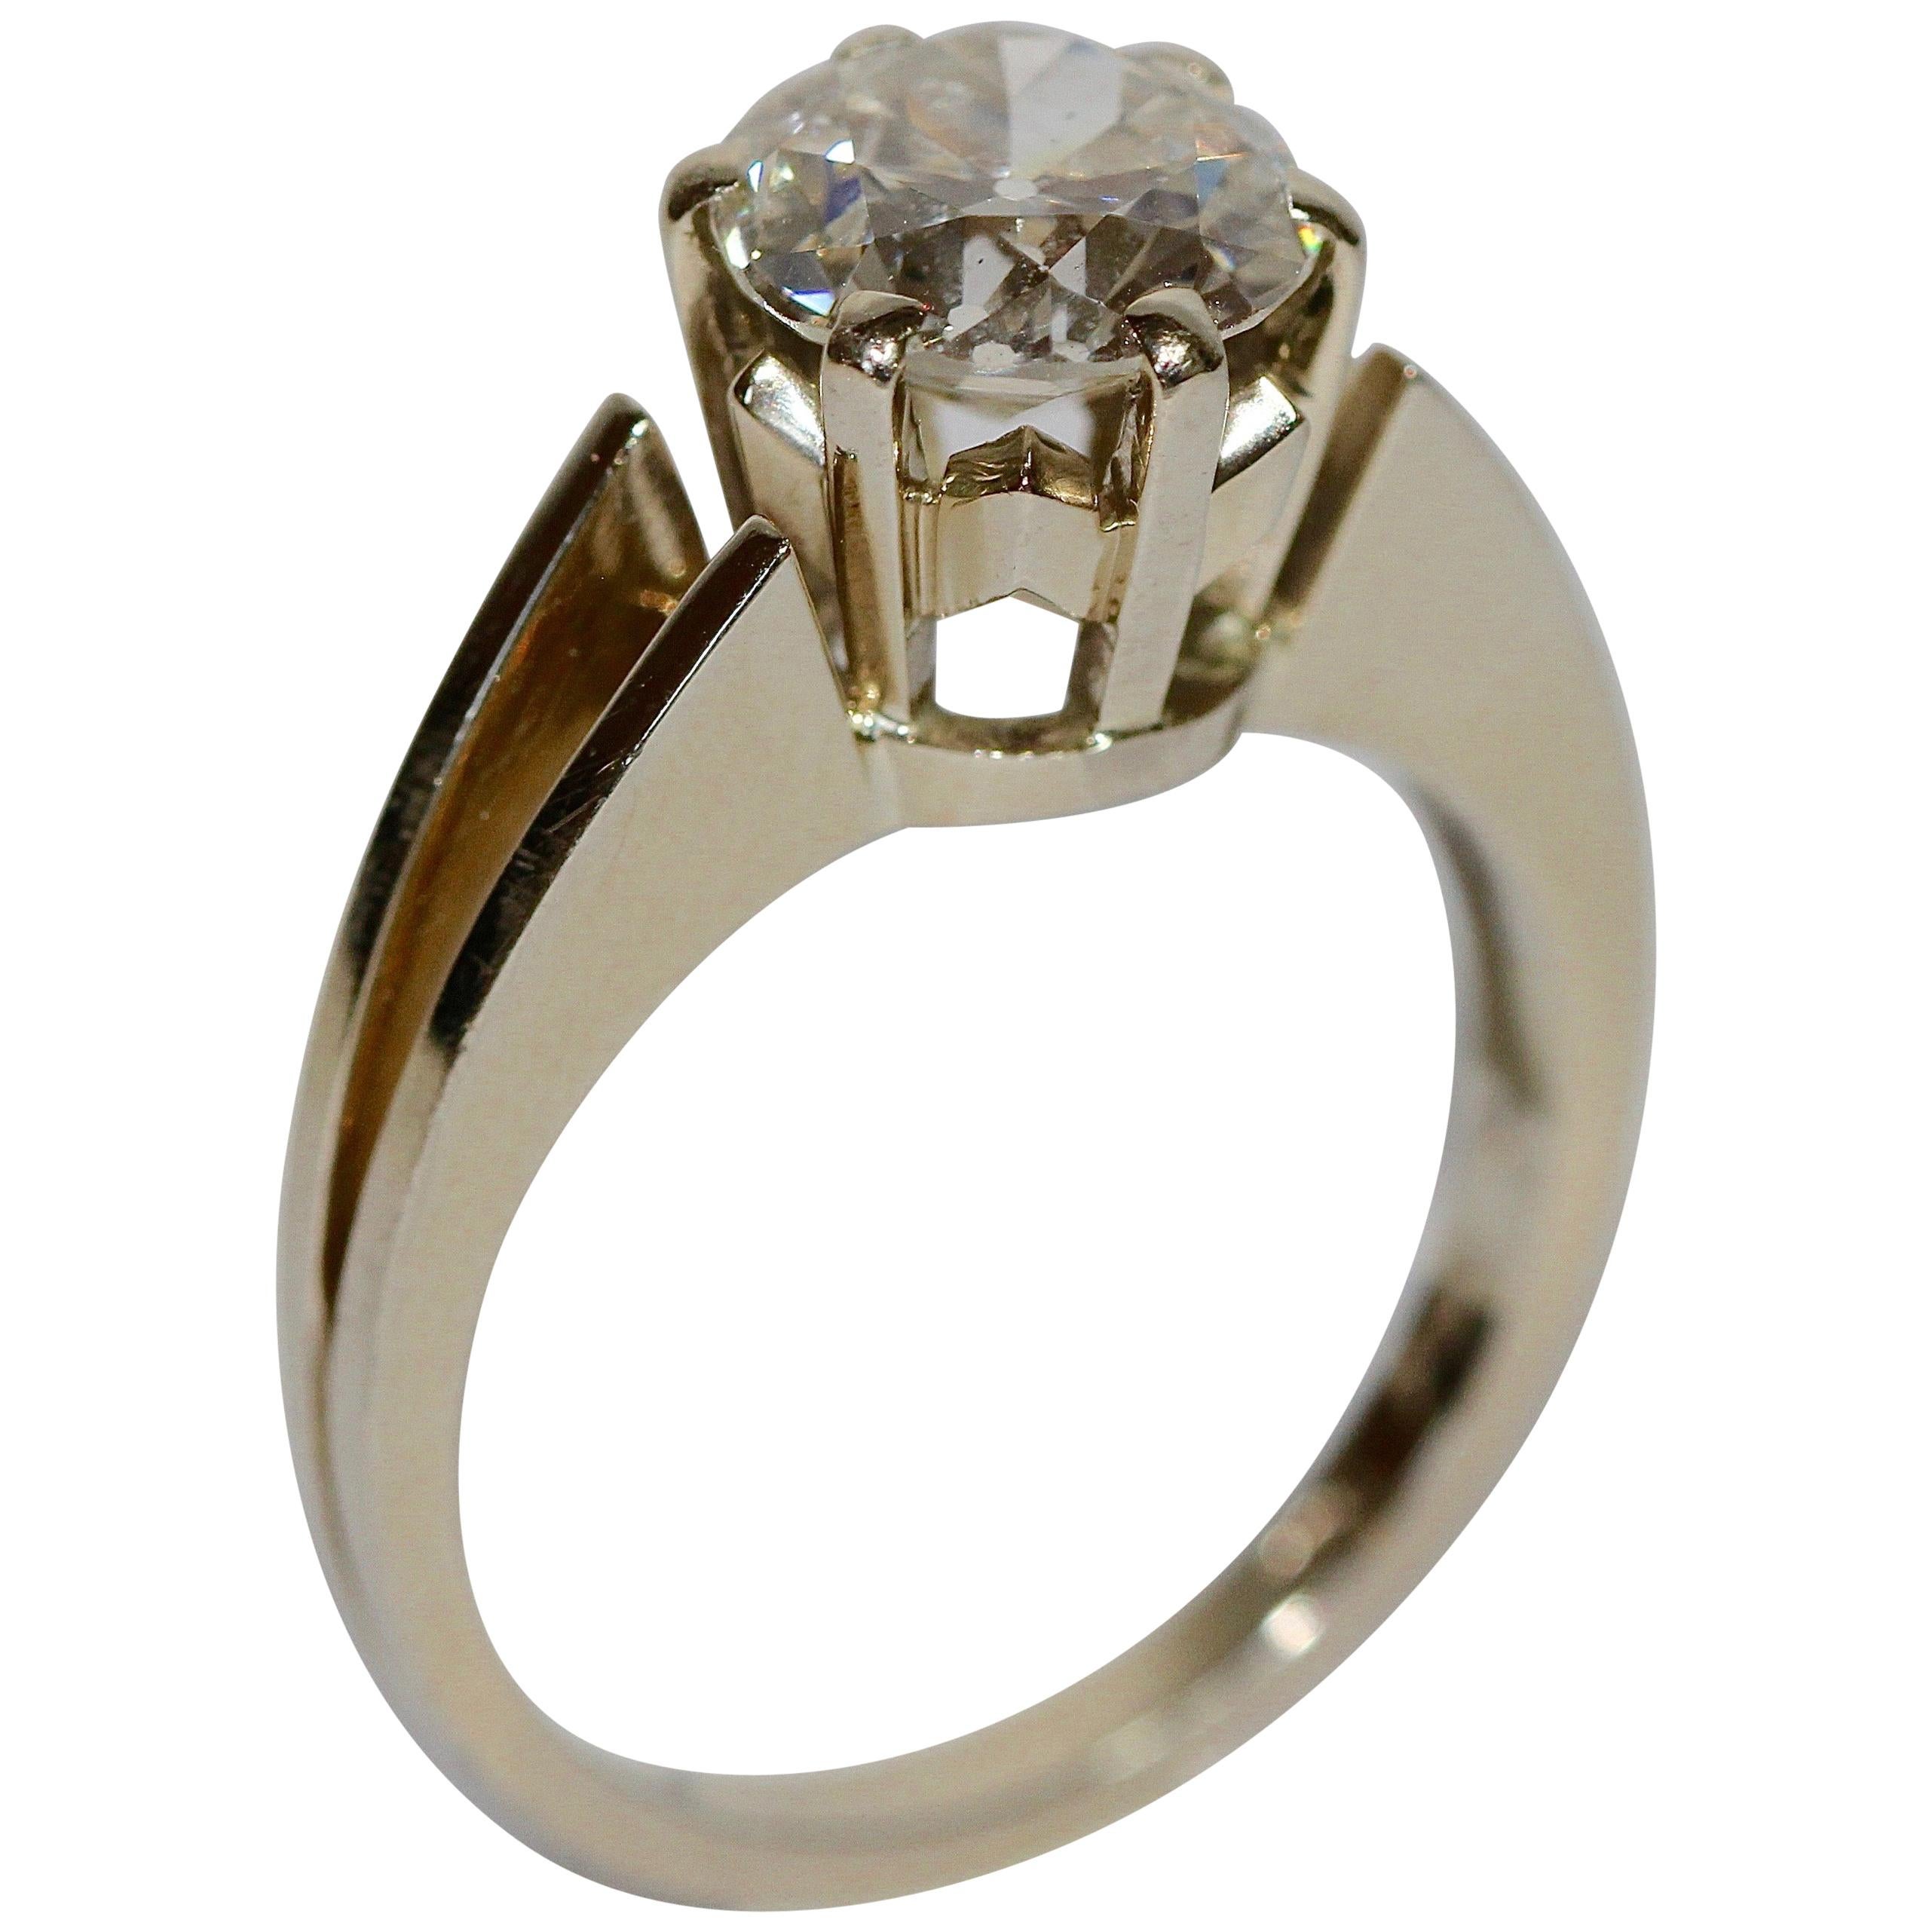 Diamond wedding Ring with Solitaire almost 2 Carat, Wesselton, VS2, 18K Gold